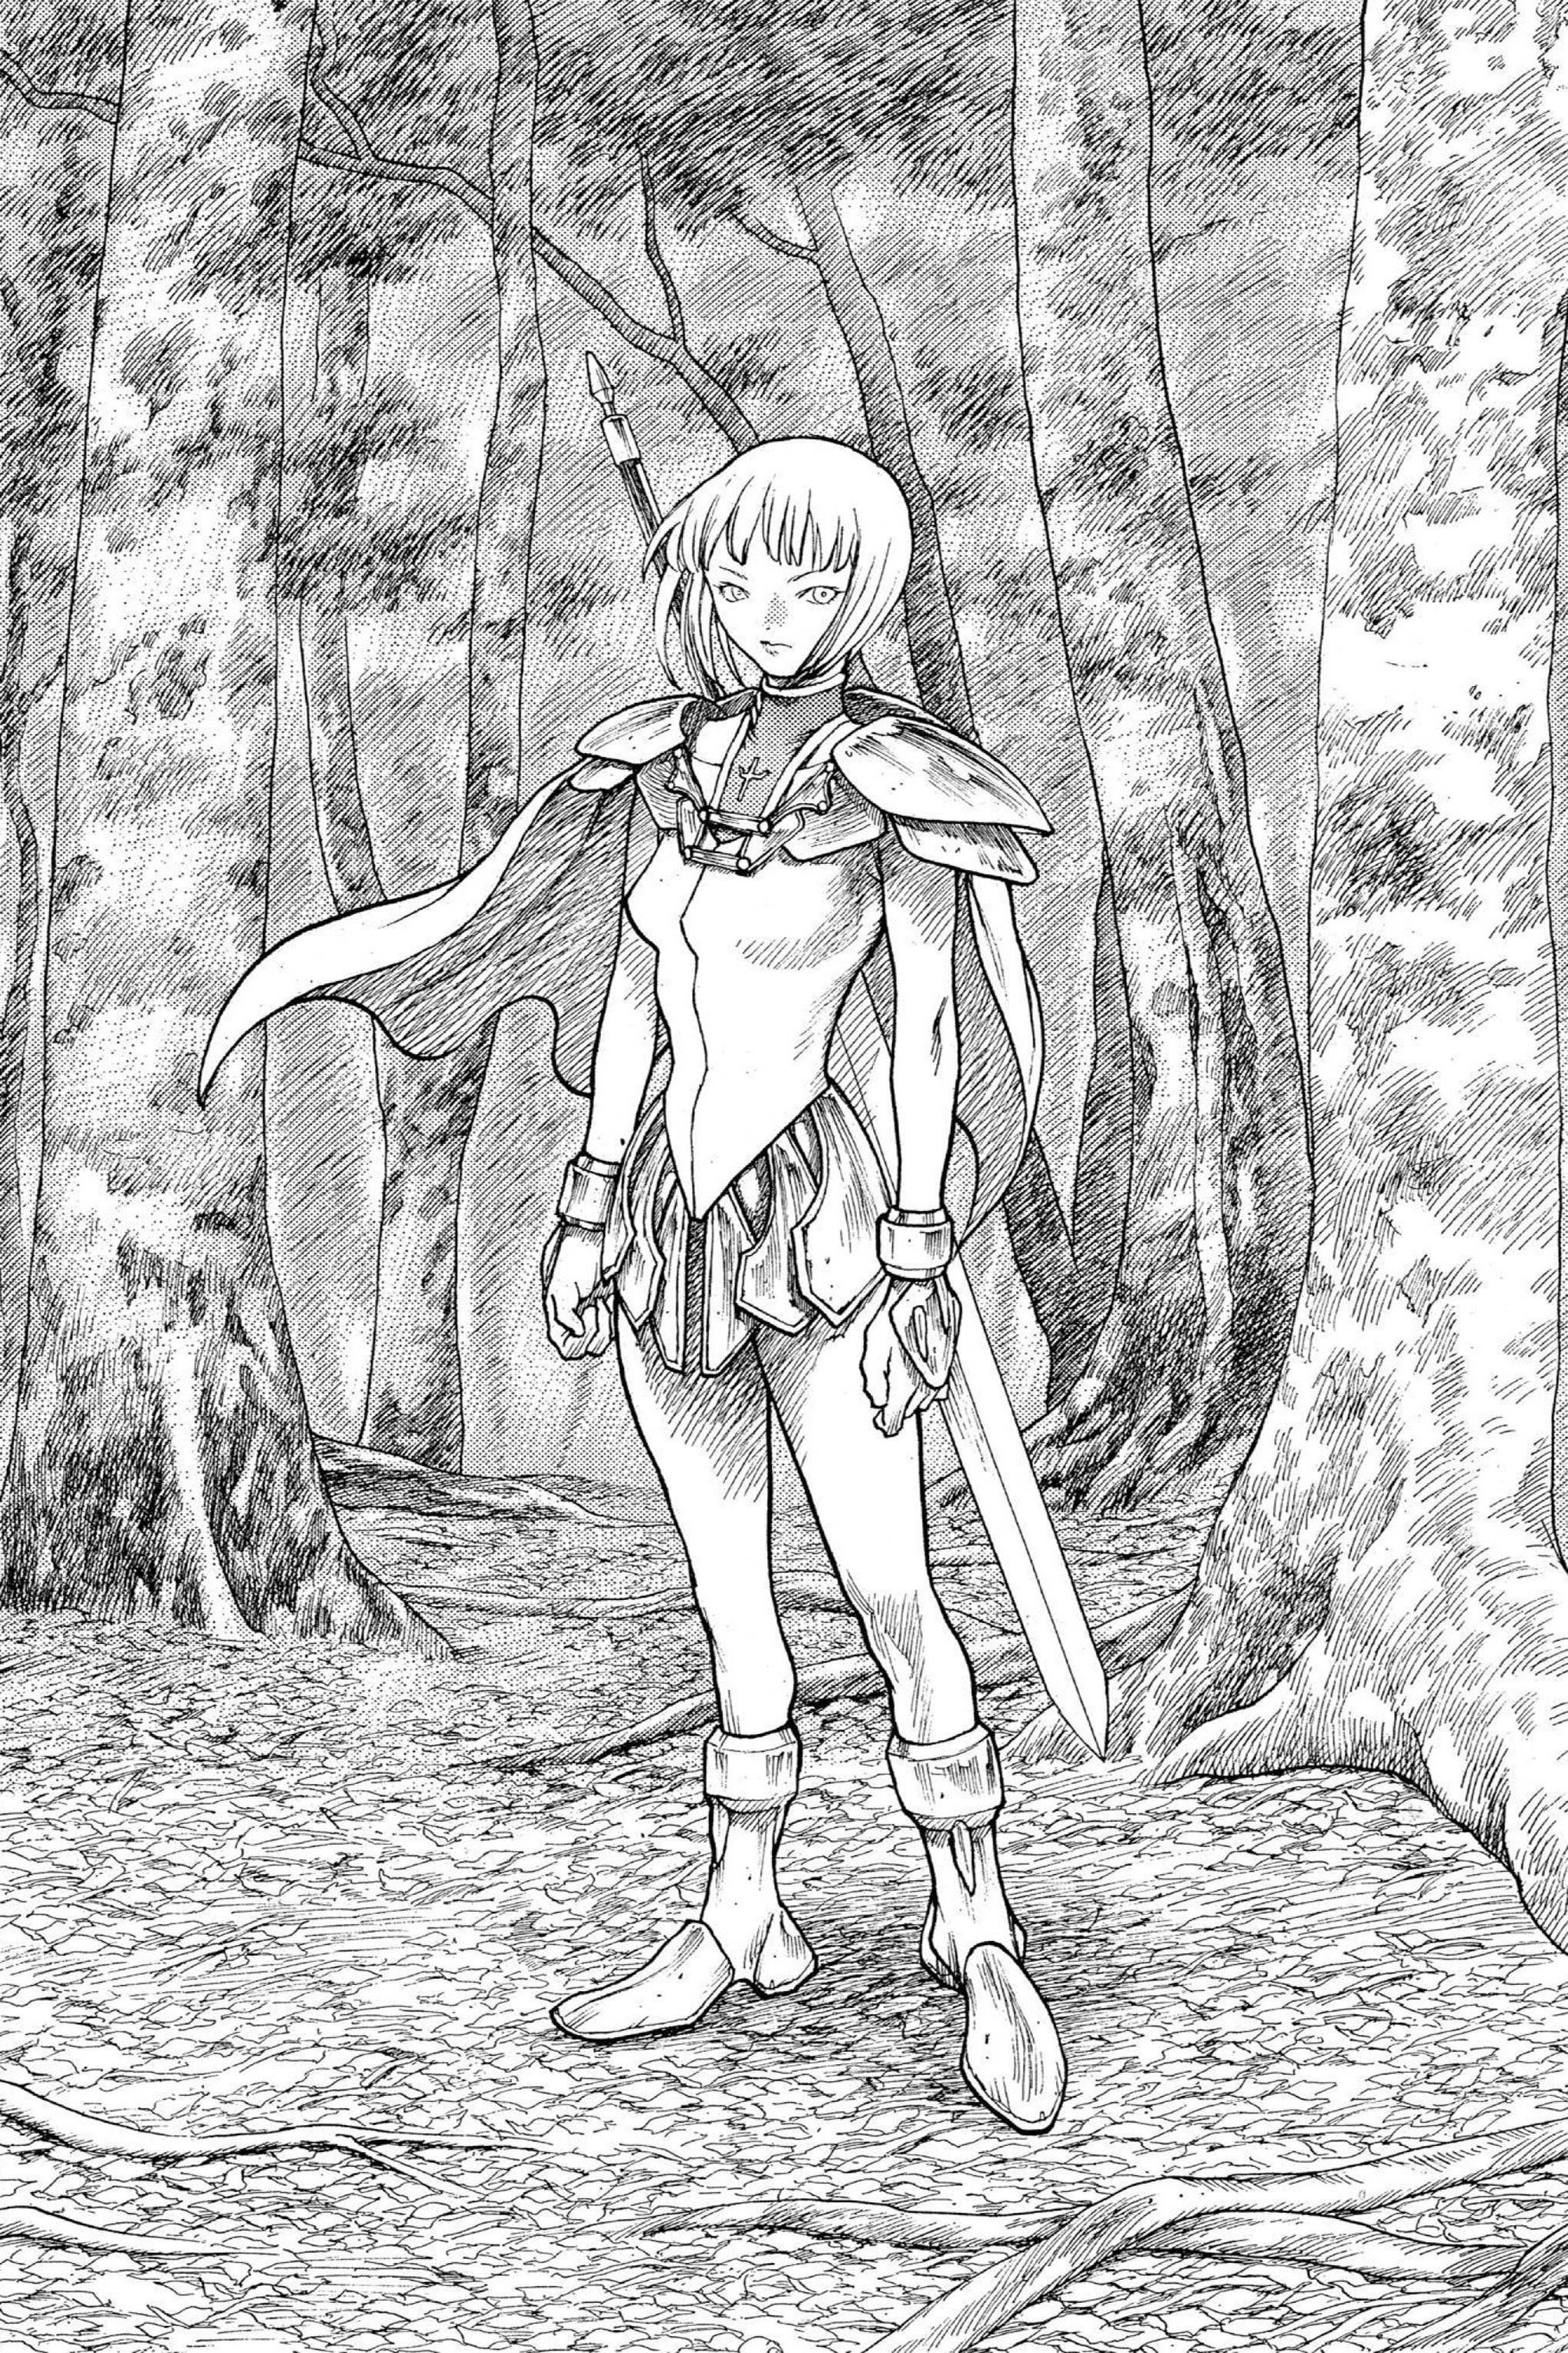 Read online Claymore comic -  Issue #1 - 100